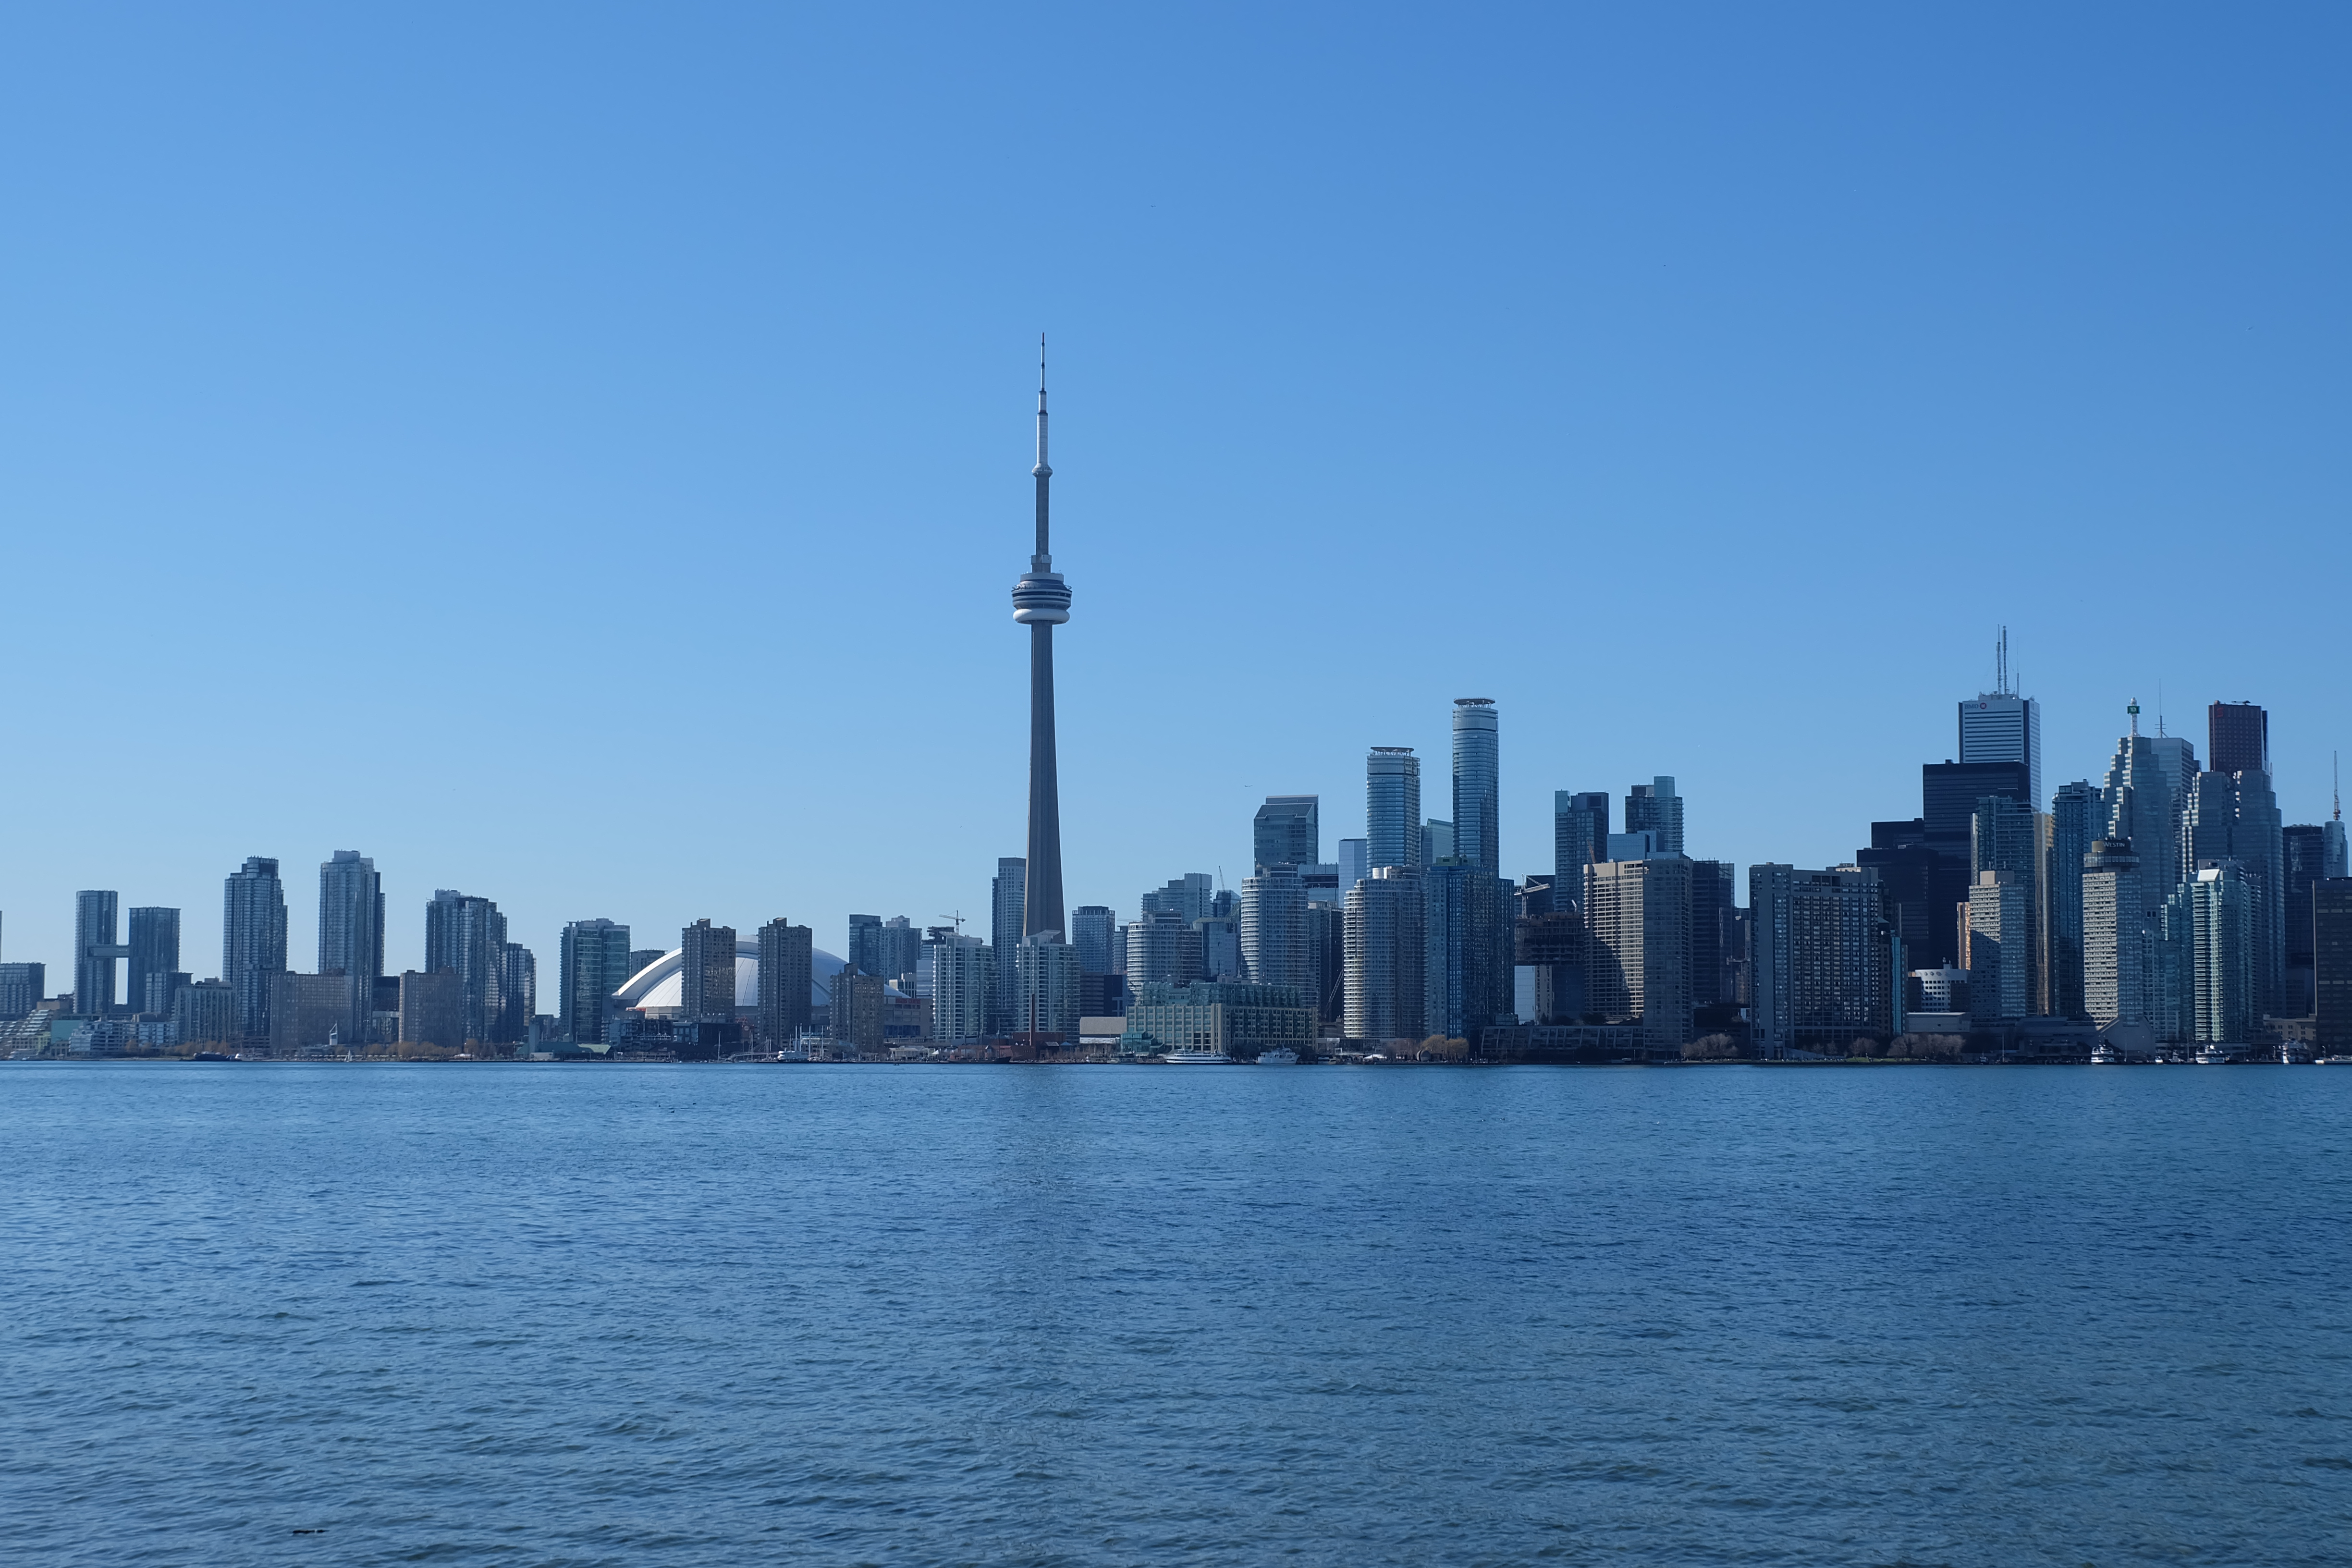 Things to Do in Toronto